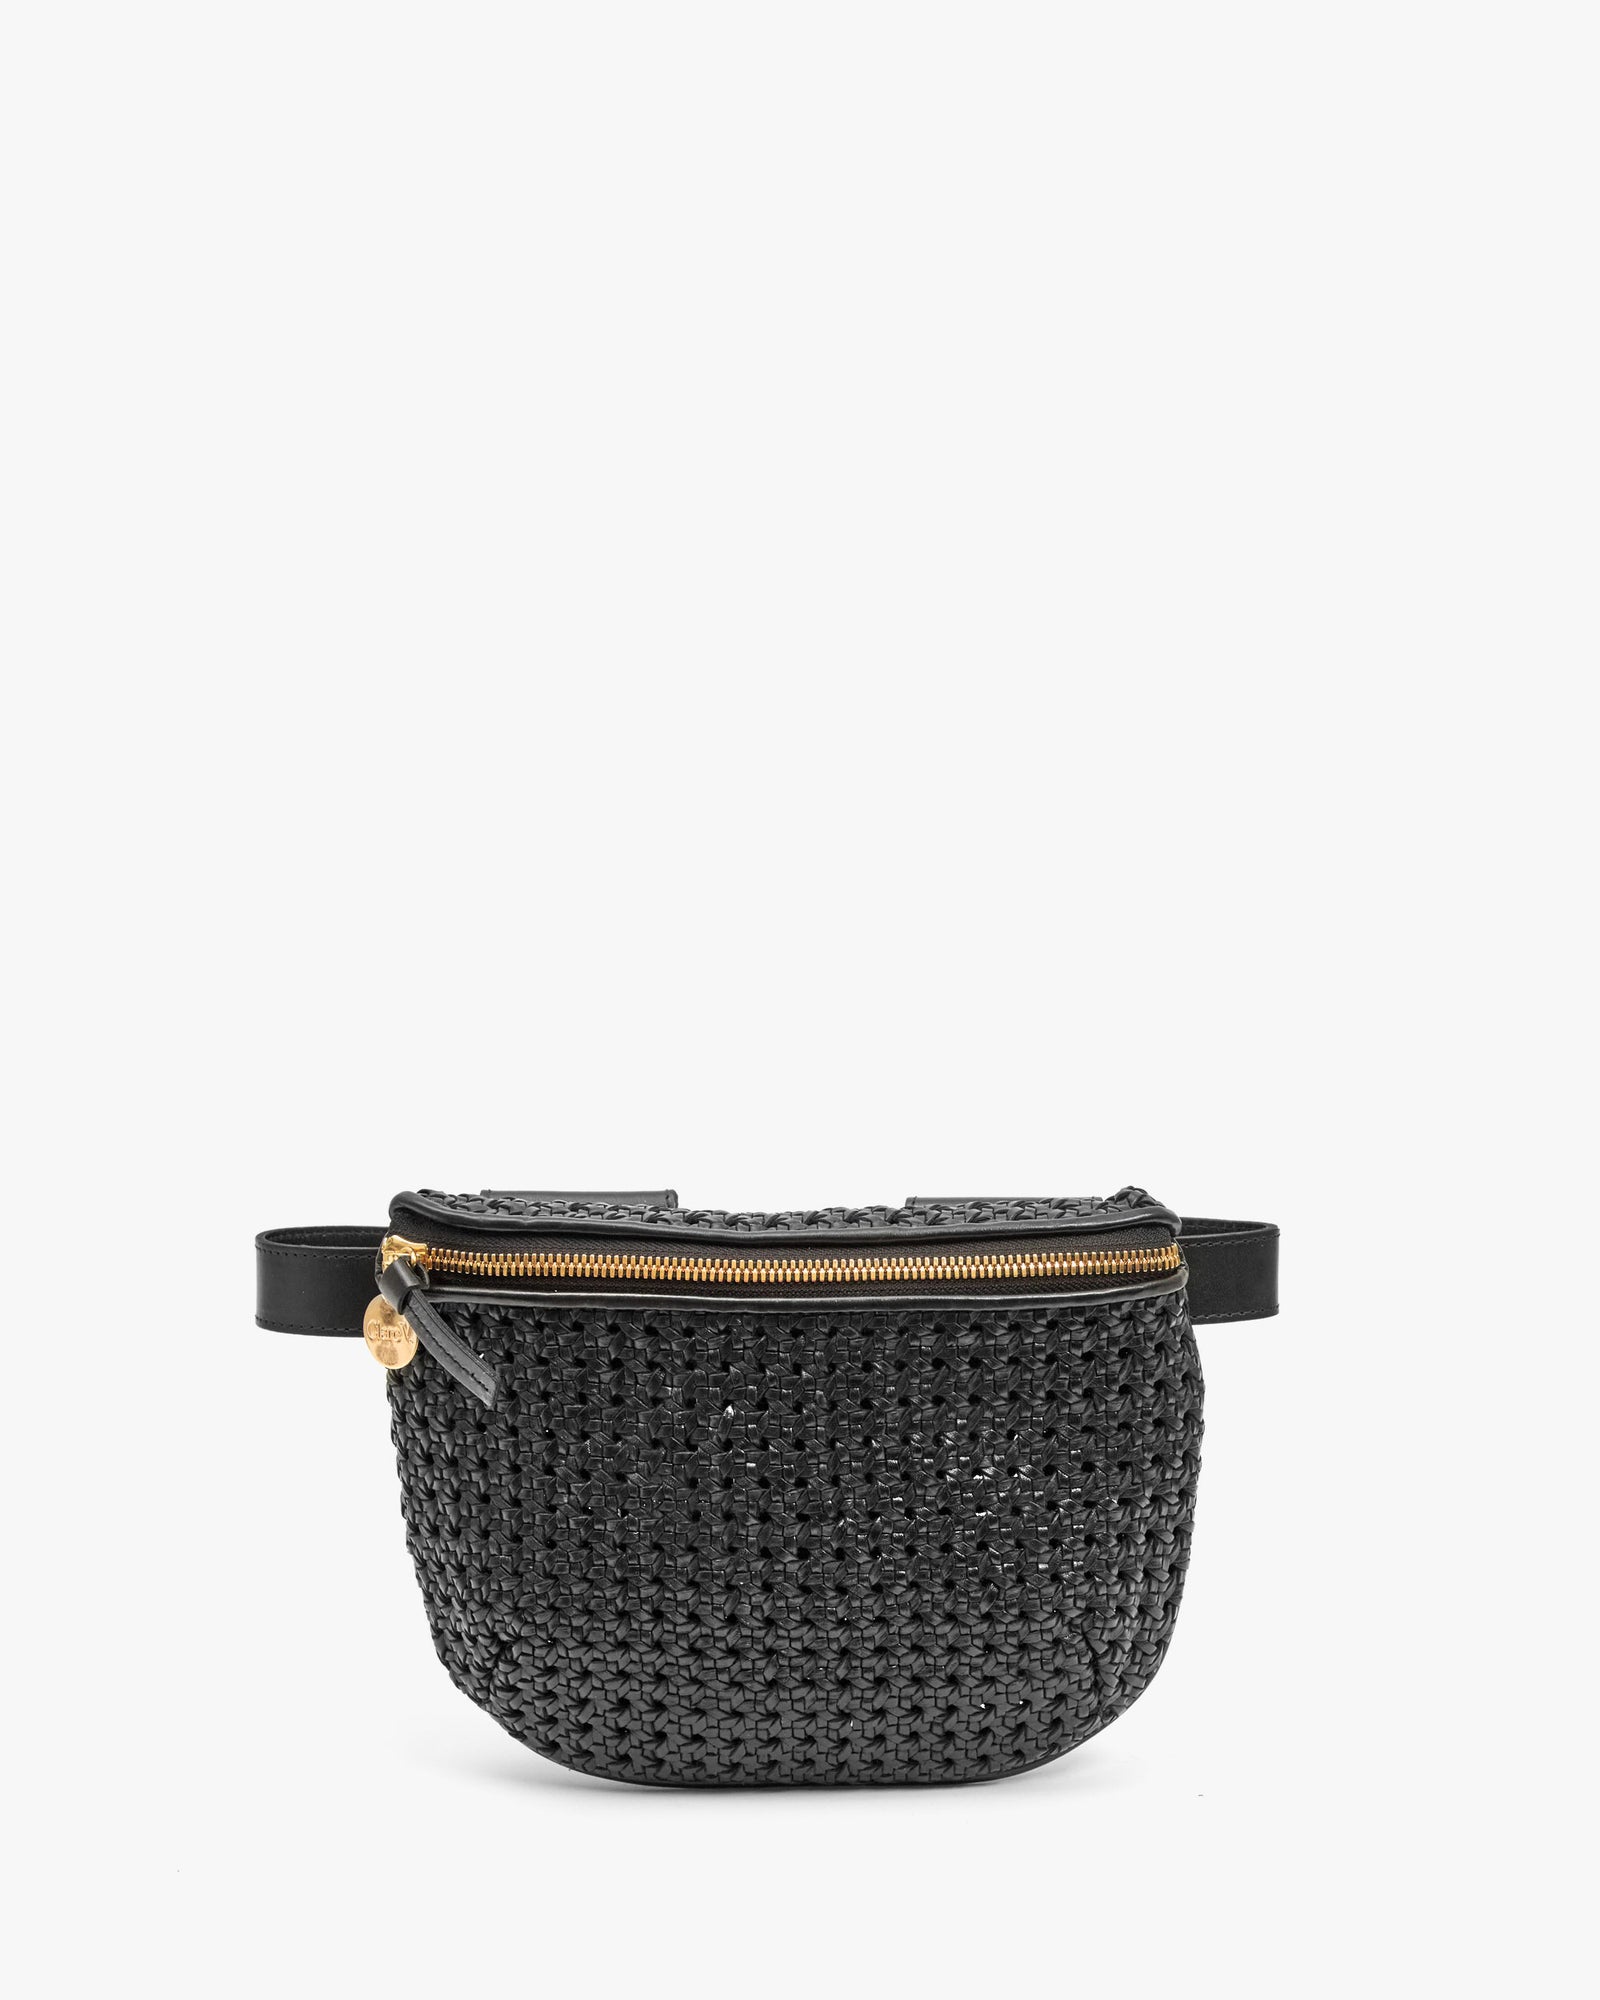 Clare V. - Fanny Pack in Black Rattan – Shop one. Augusta